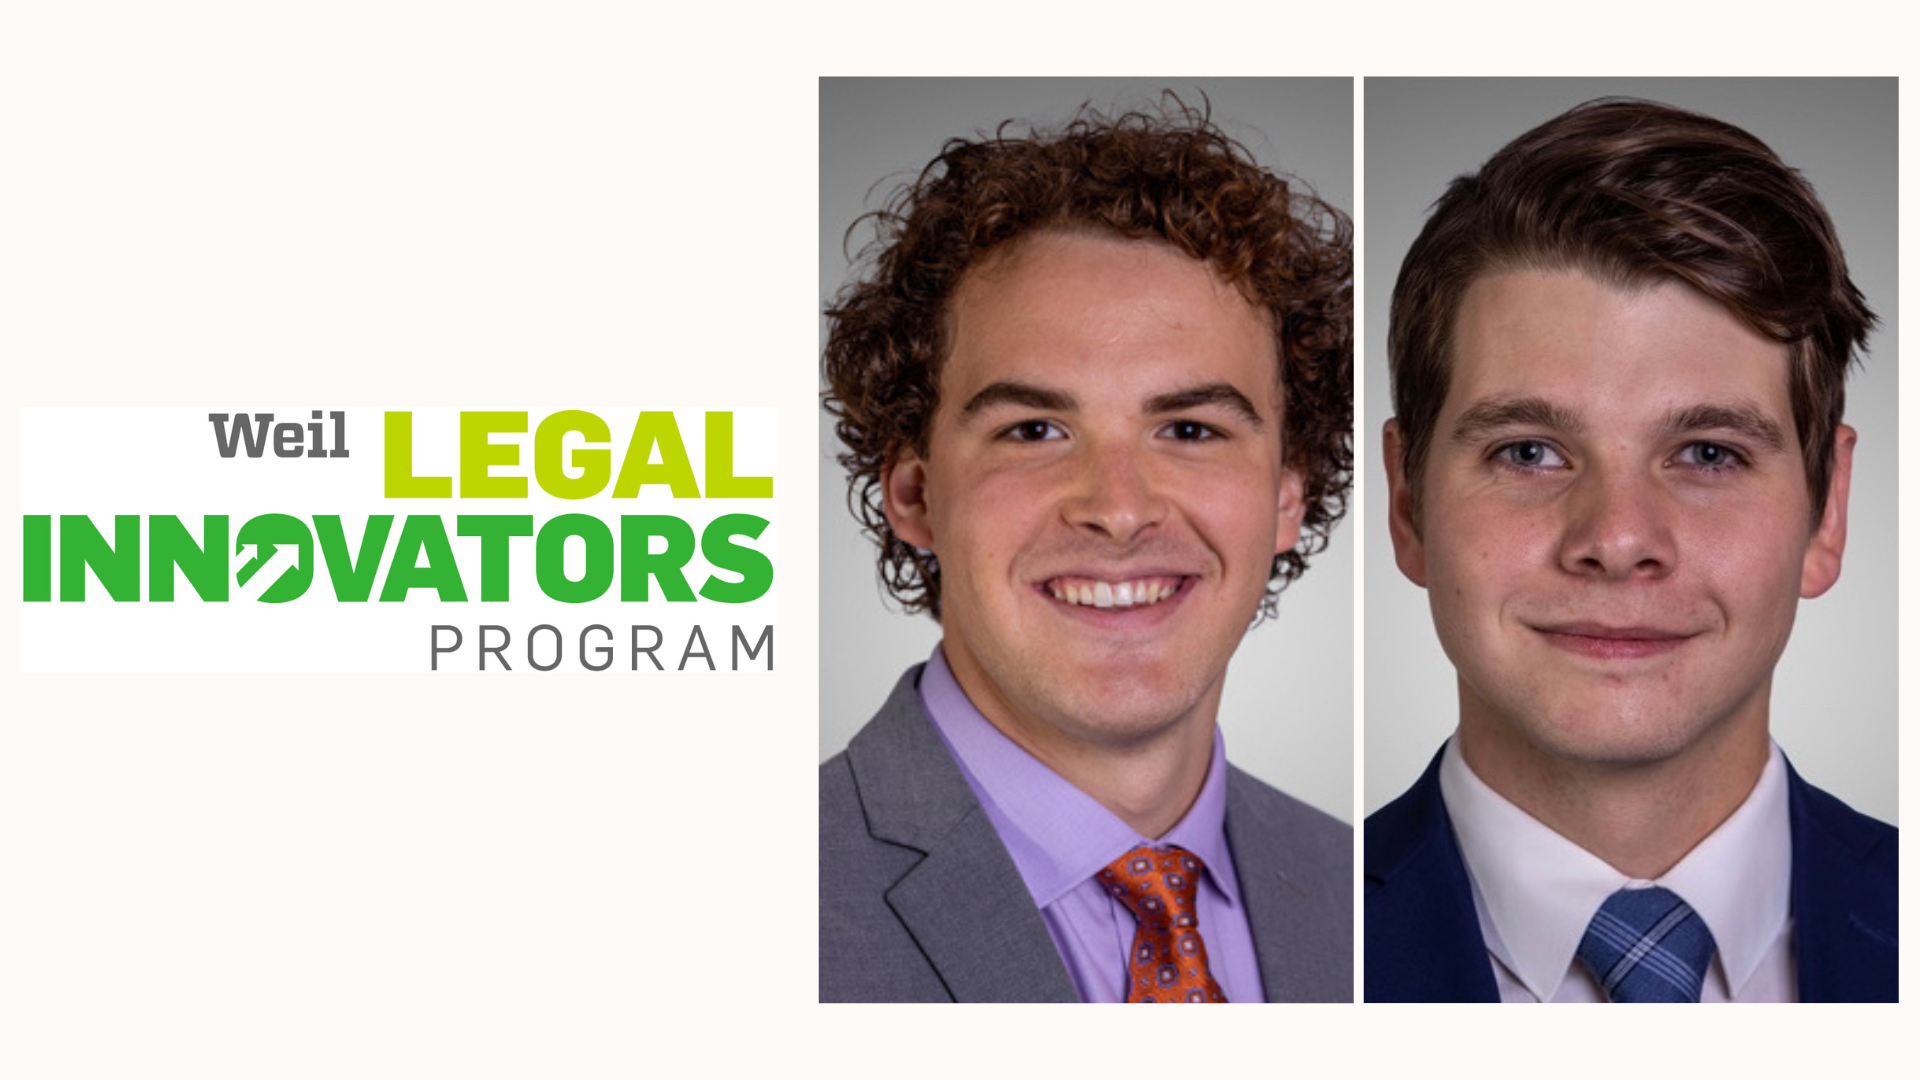 Weil Legal Innovators, photos of two students